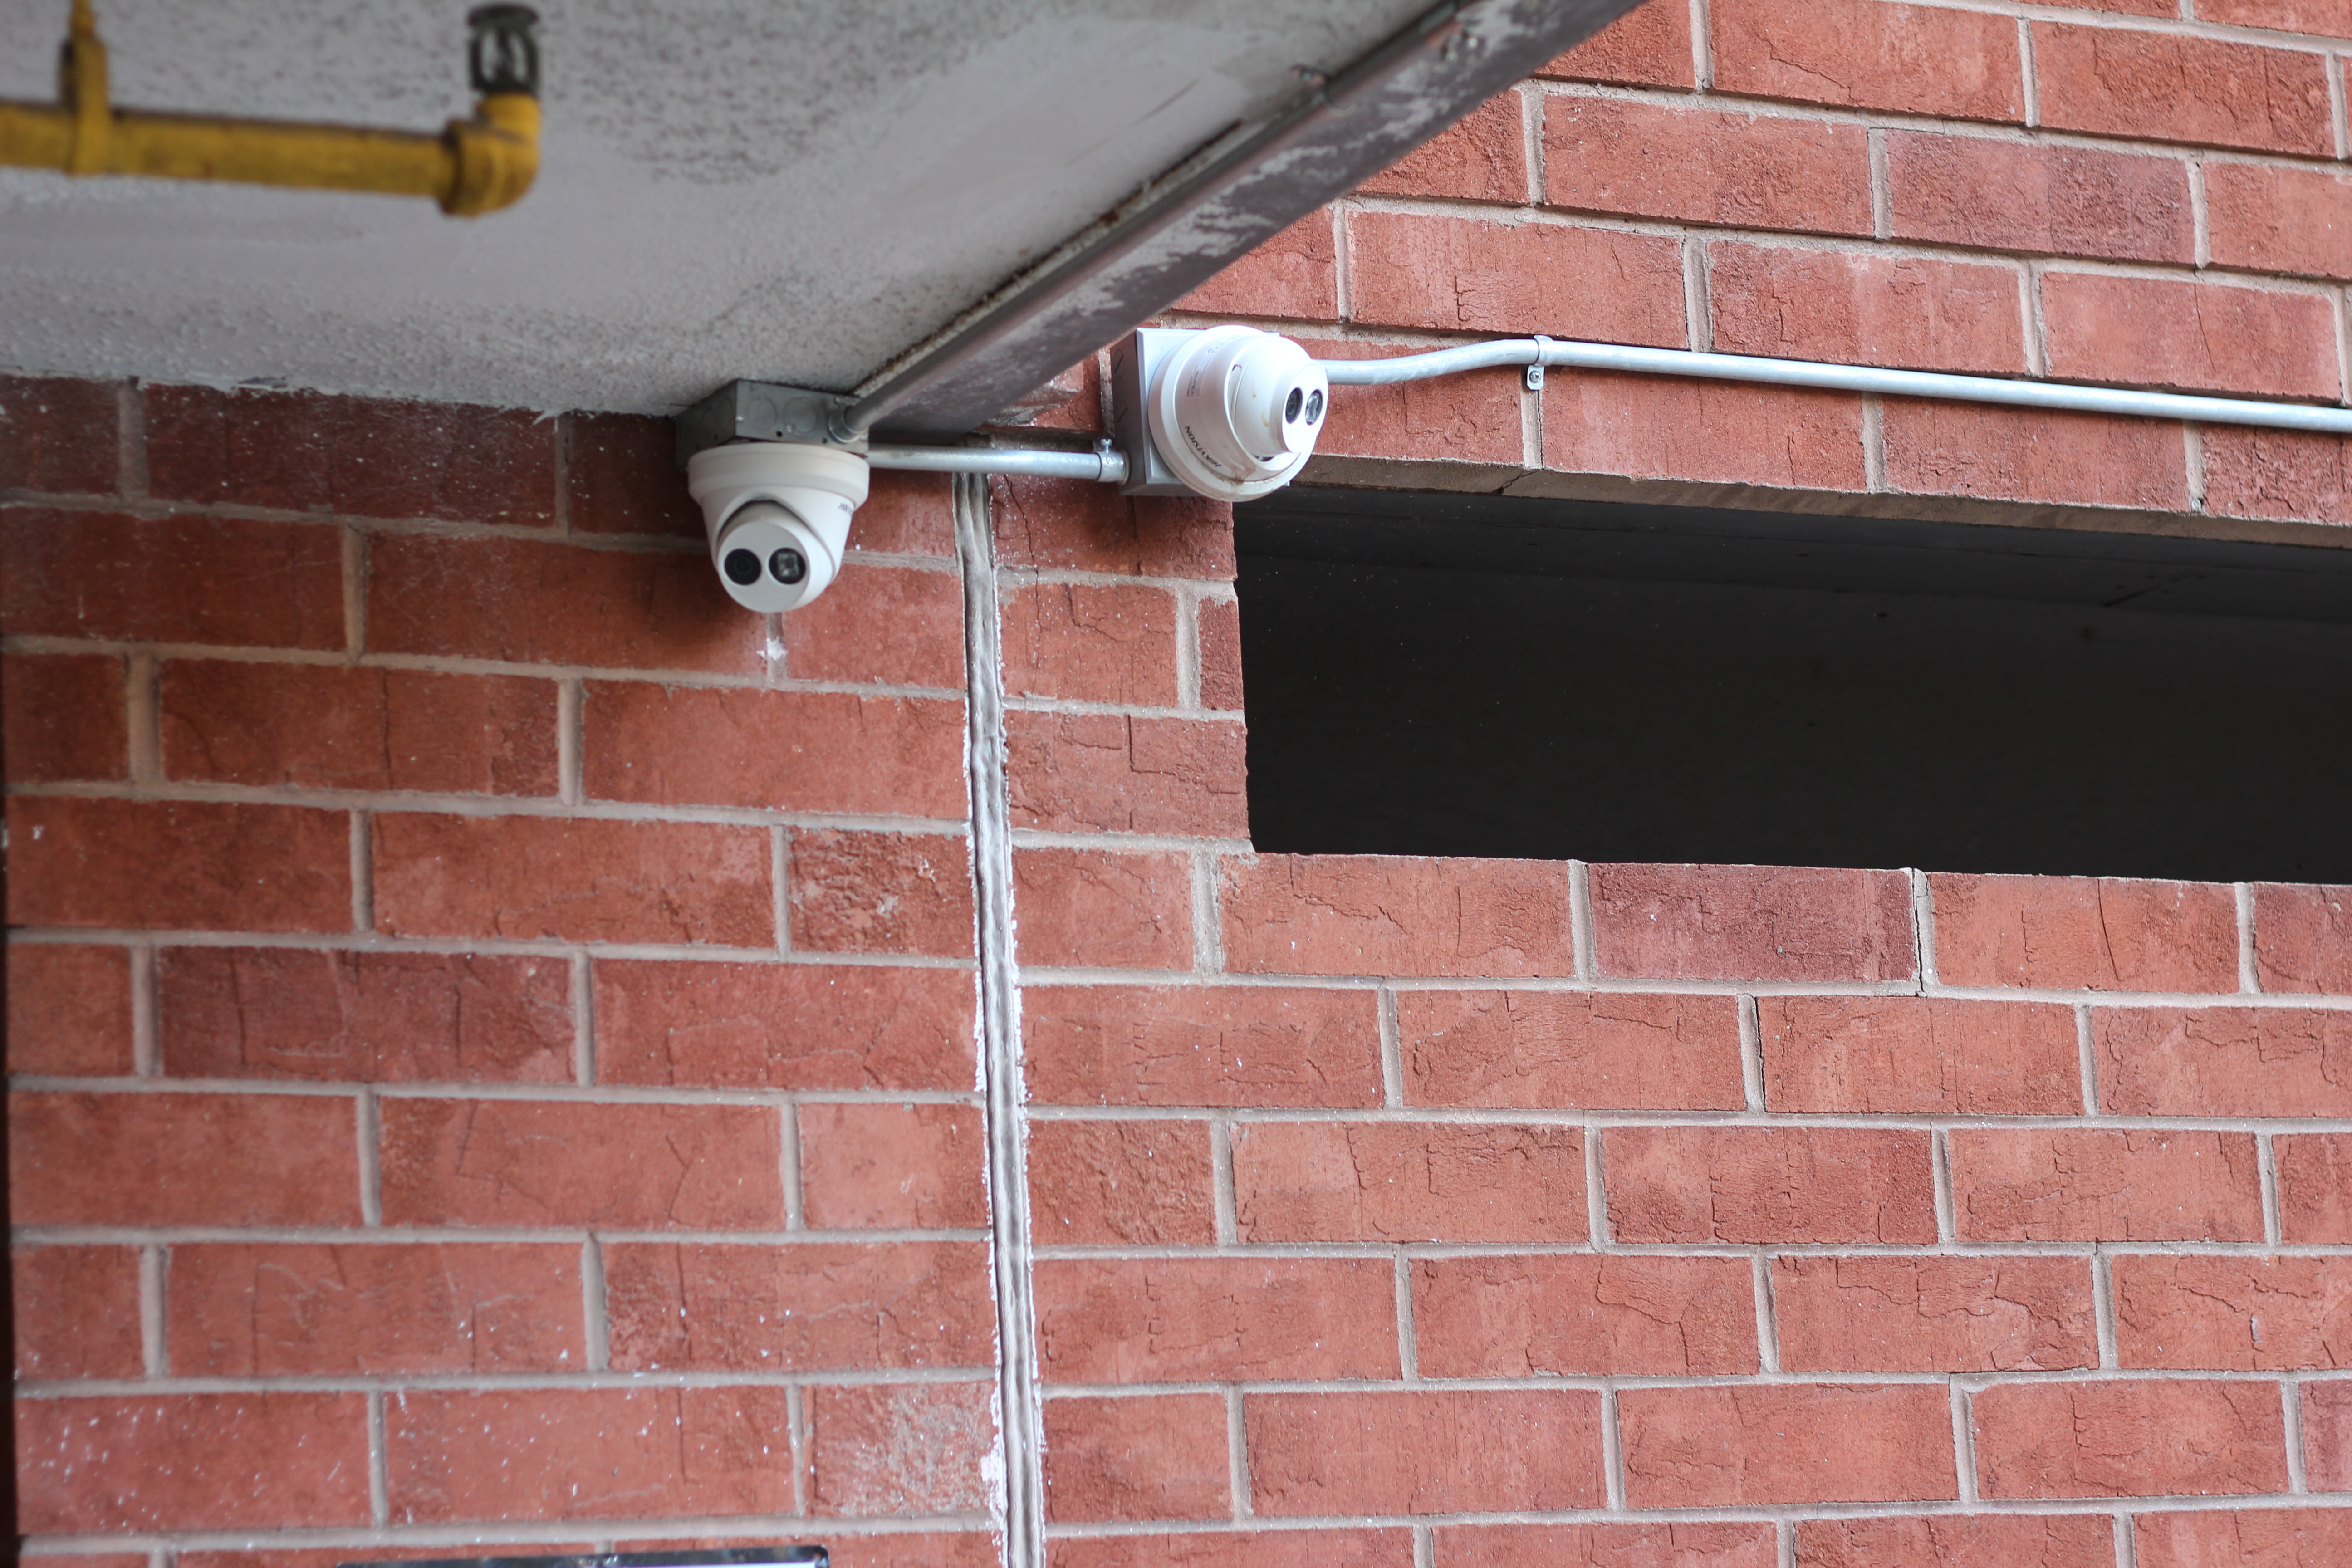 How to Install a Security Camera on a Brick Wall: Expert Guide